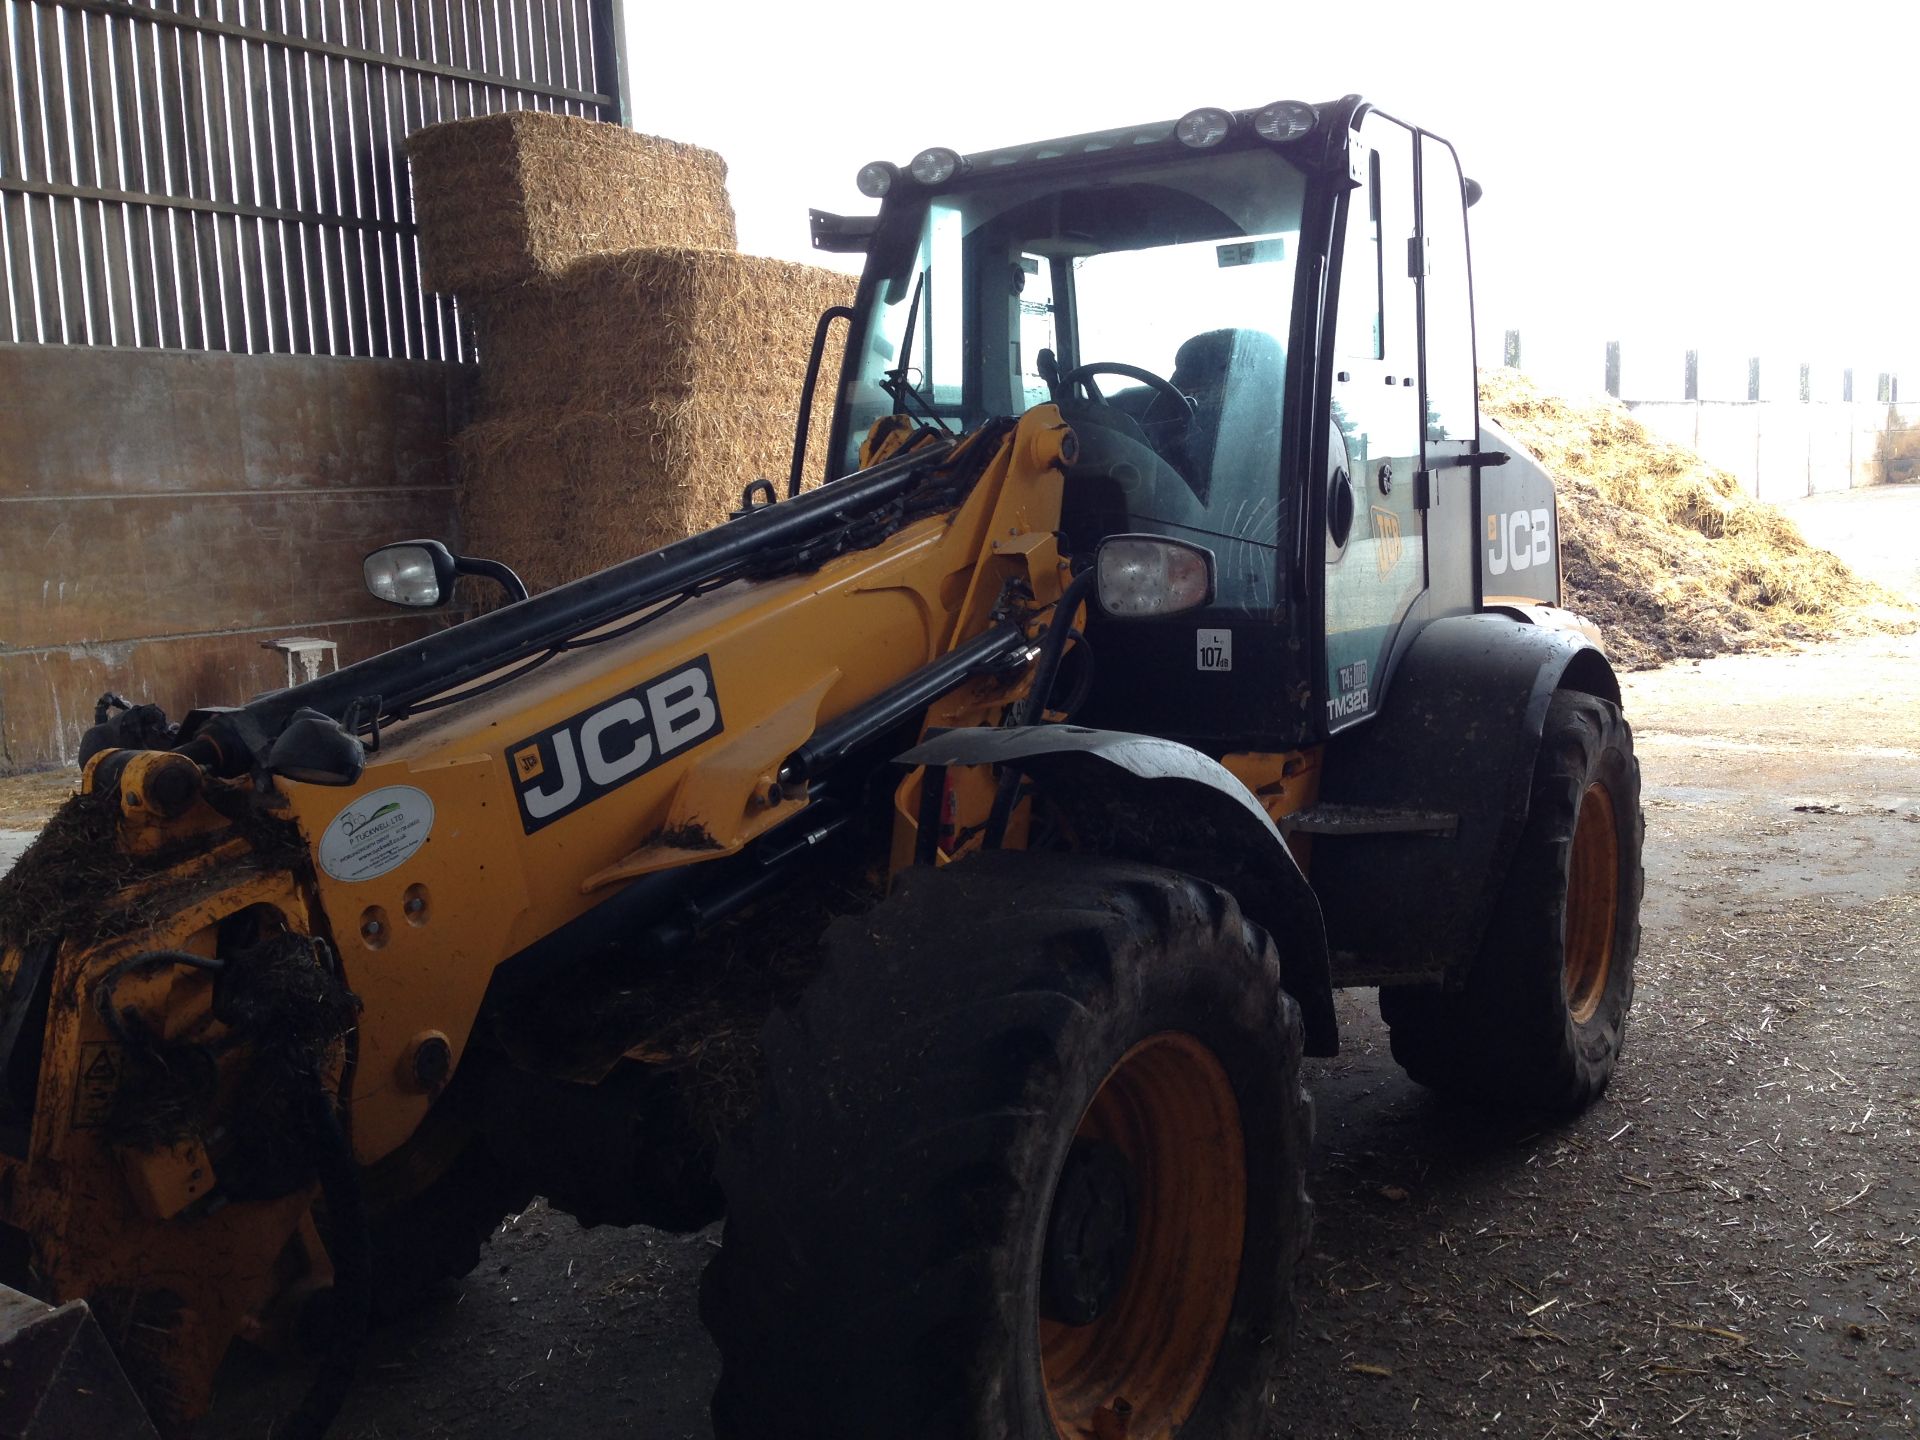 JCB TM320 Agri T4i iiiB, Articulated Loader, Auto Hitch, PUH, Location Diss, Norfolk. - Image 2 of 10